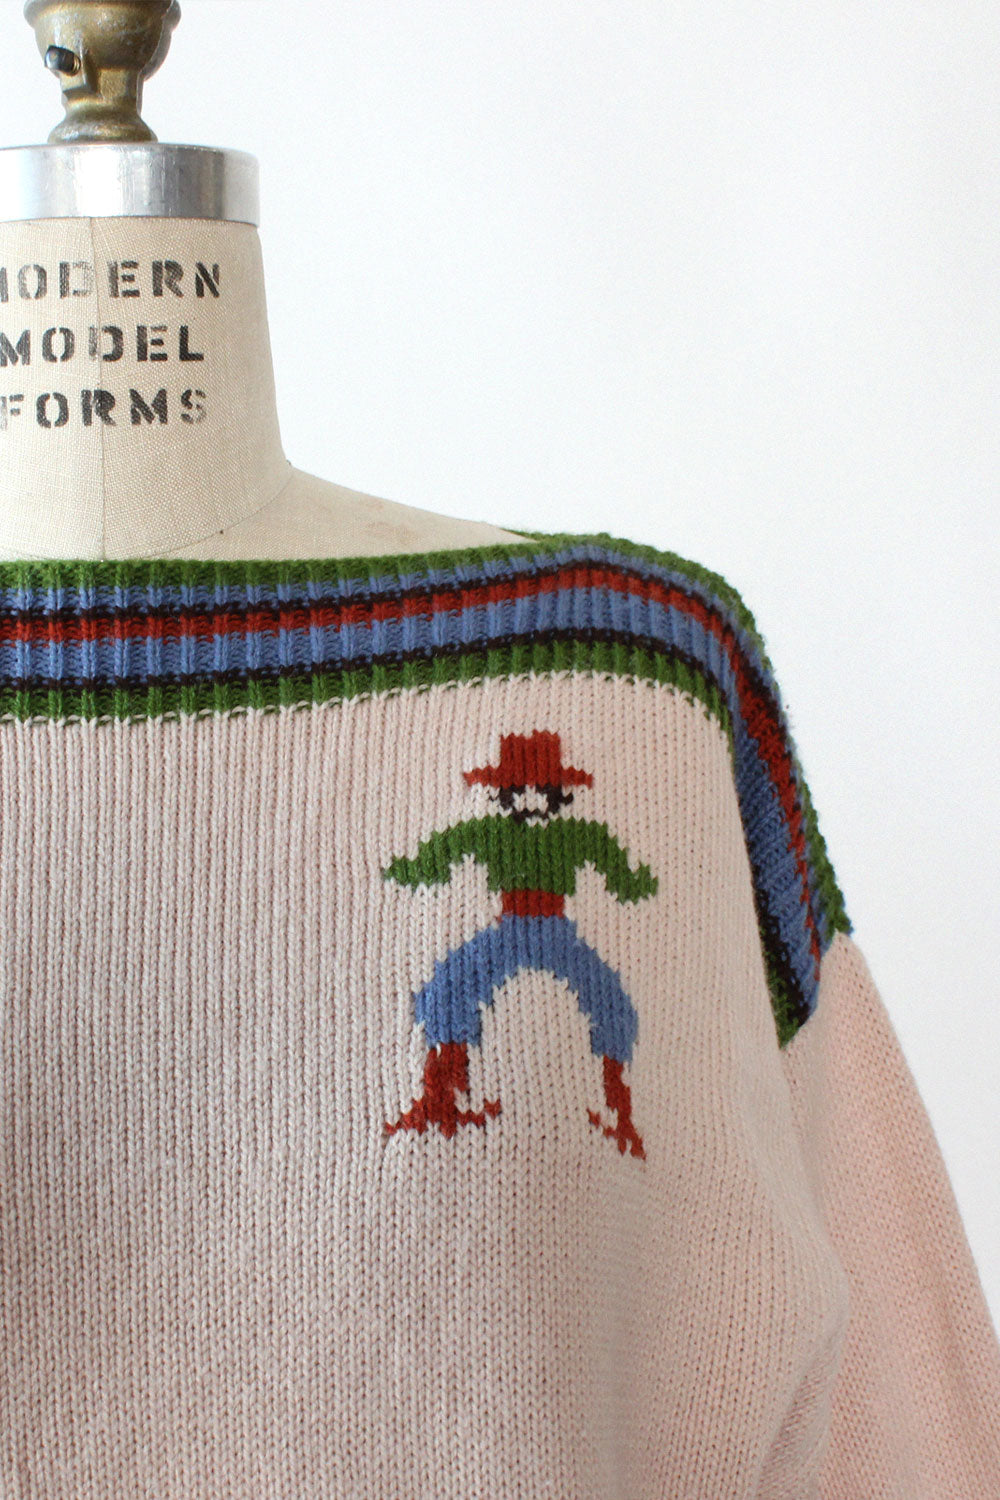 Cacti and Gaucho Sweater S-L